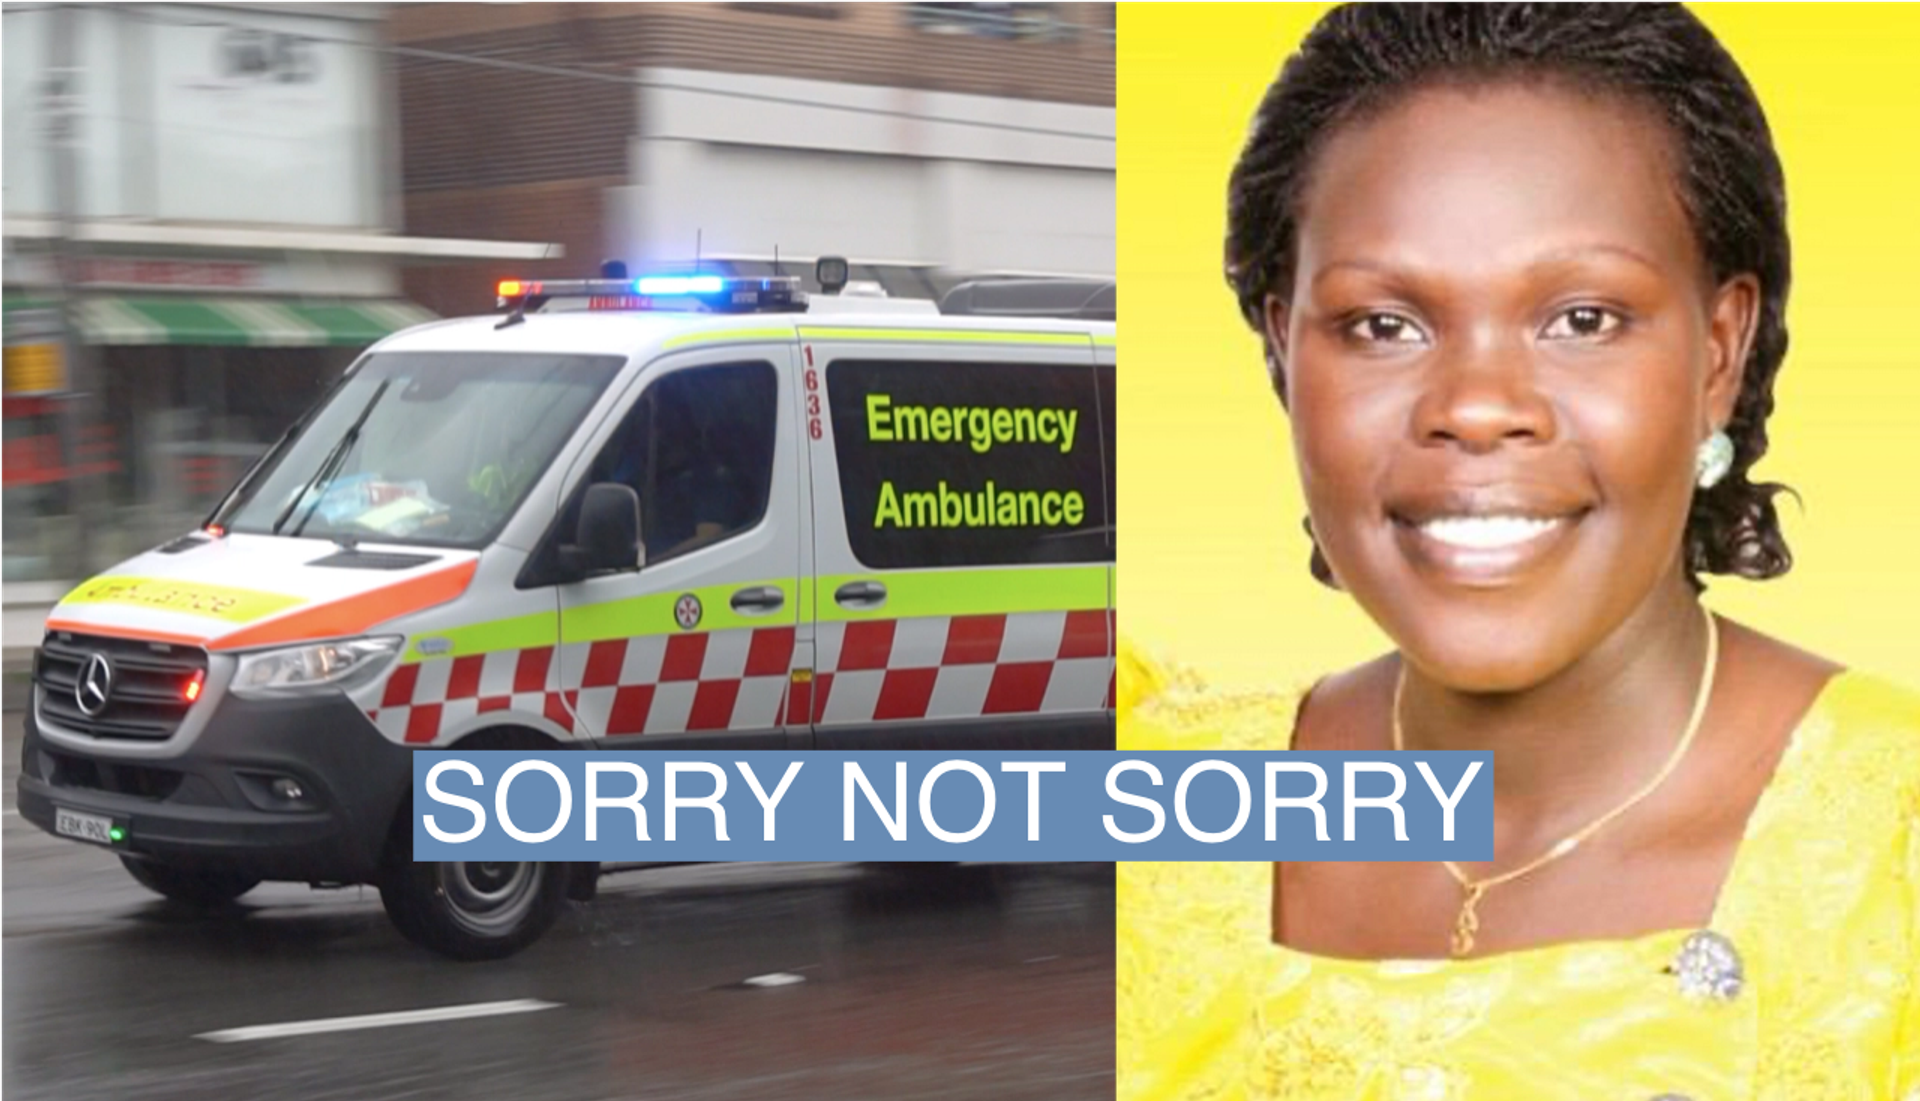 A graphic showing an ambulance and Evelyn Anite